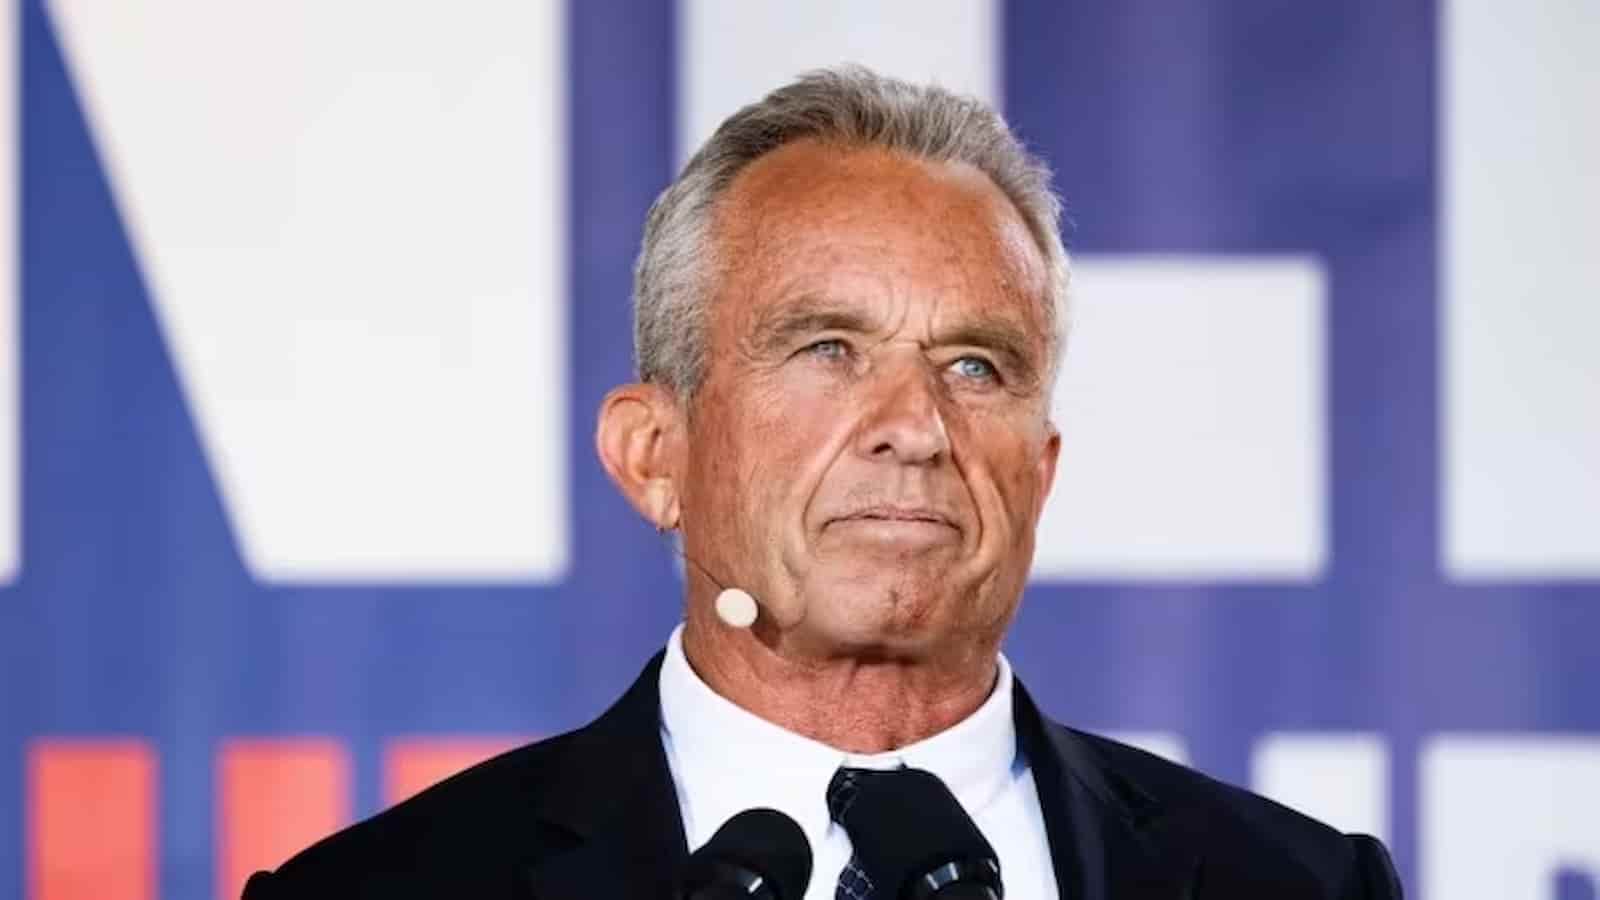 Robert Kennedy Jr., Nephew of John F. Kennedy, Running as Independent Candidate for US Presidency